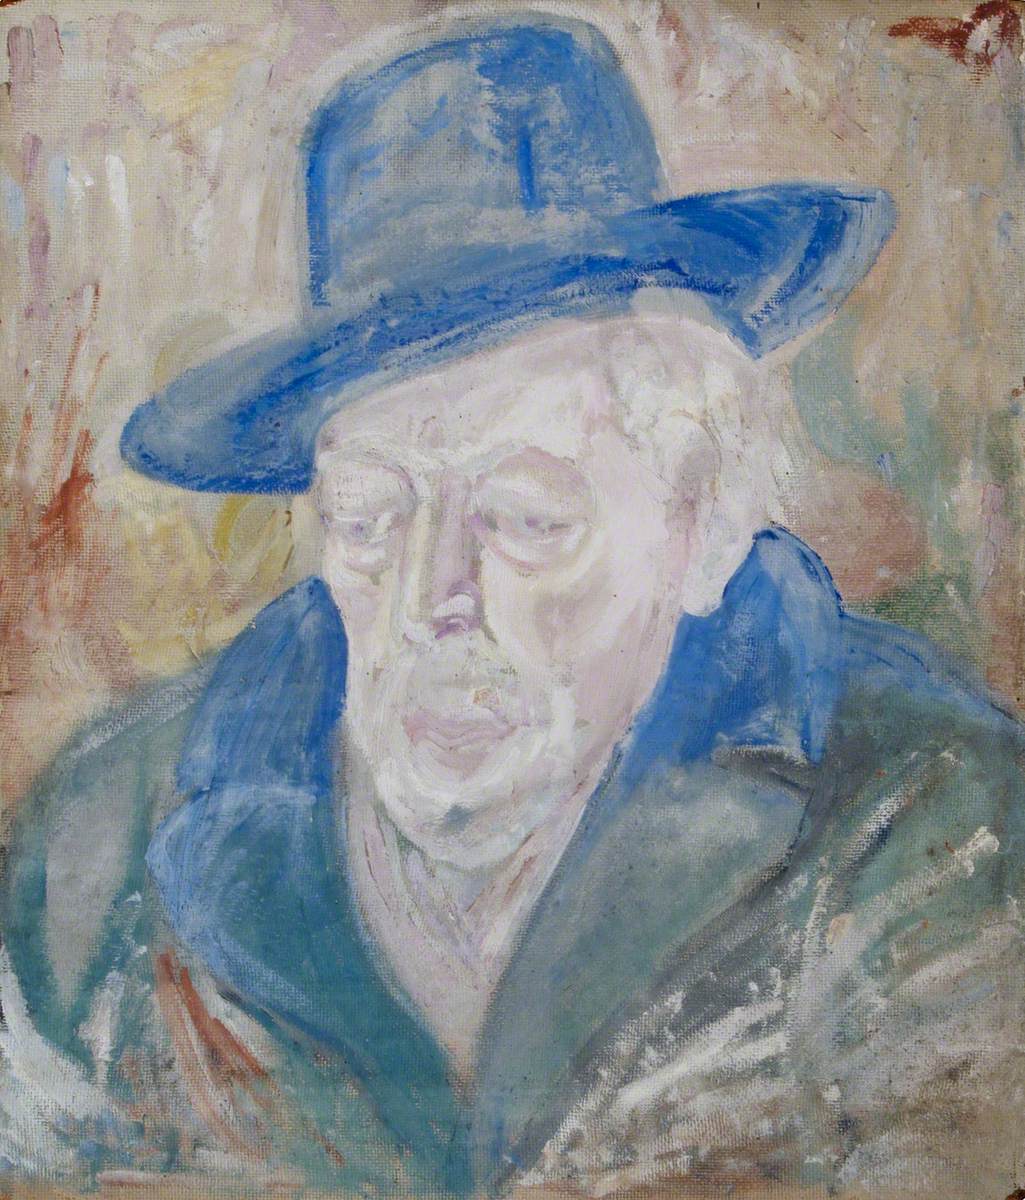 Portrait of a Man in a Fedora Hat